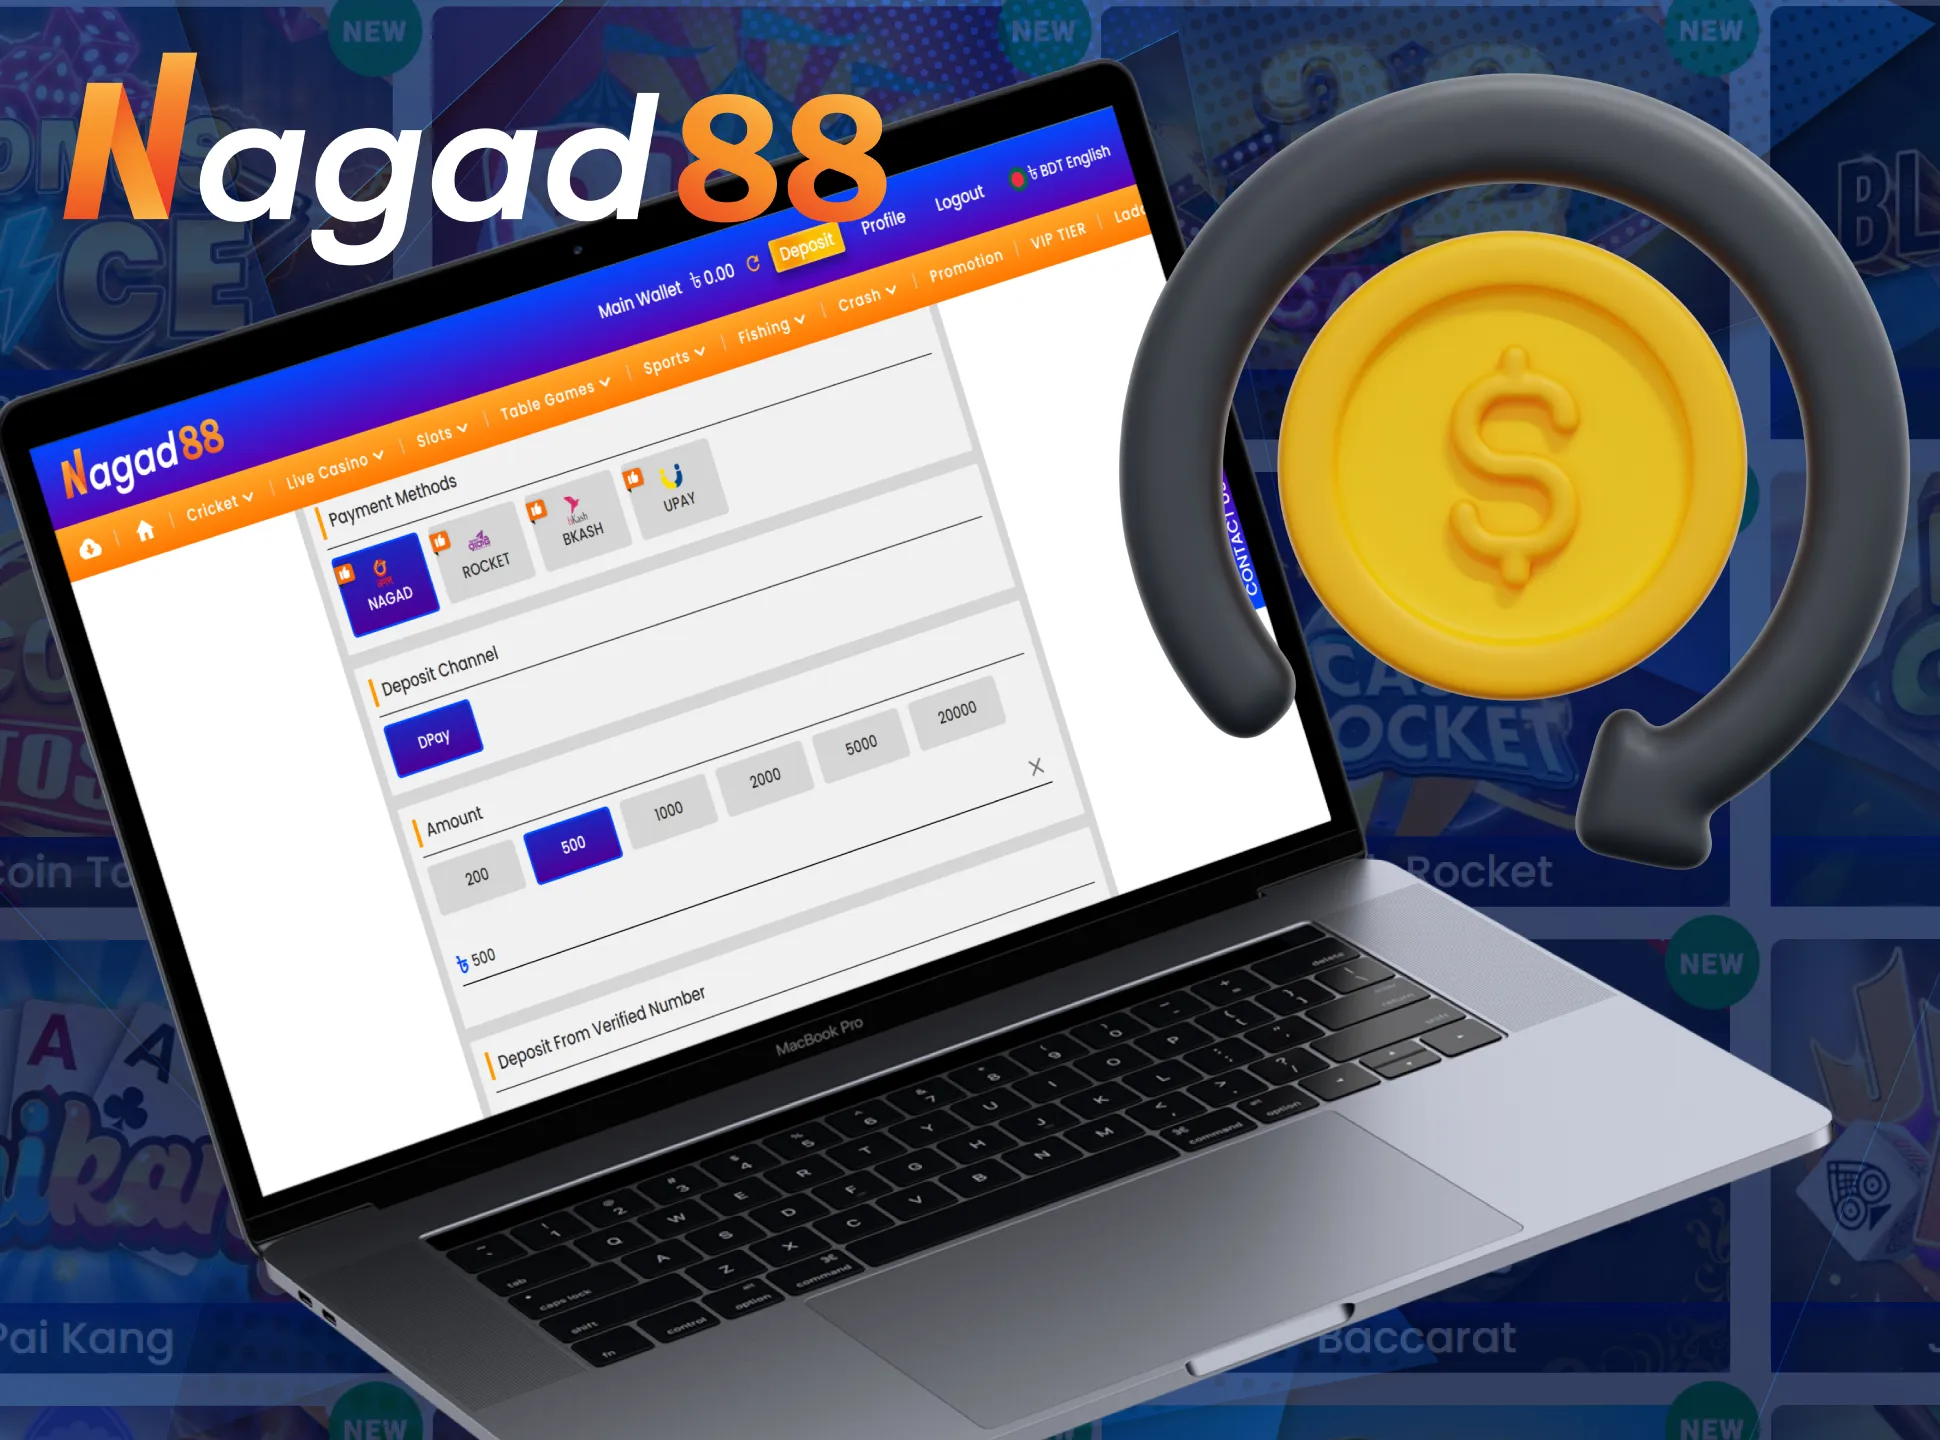 Fund your account to play live casino games at Nagad88.